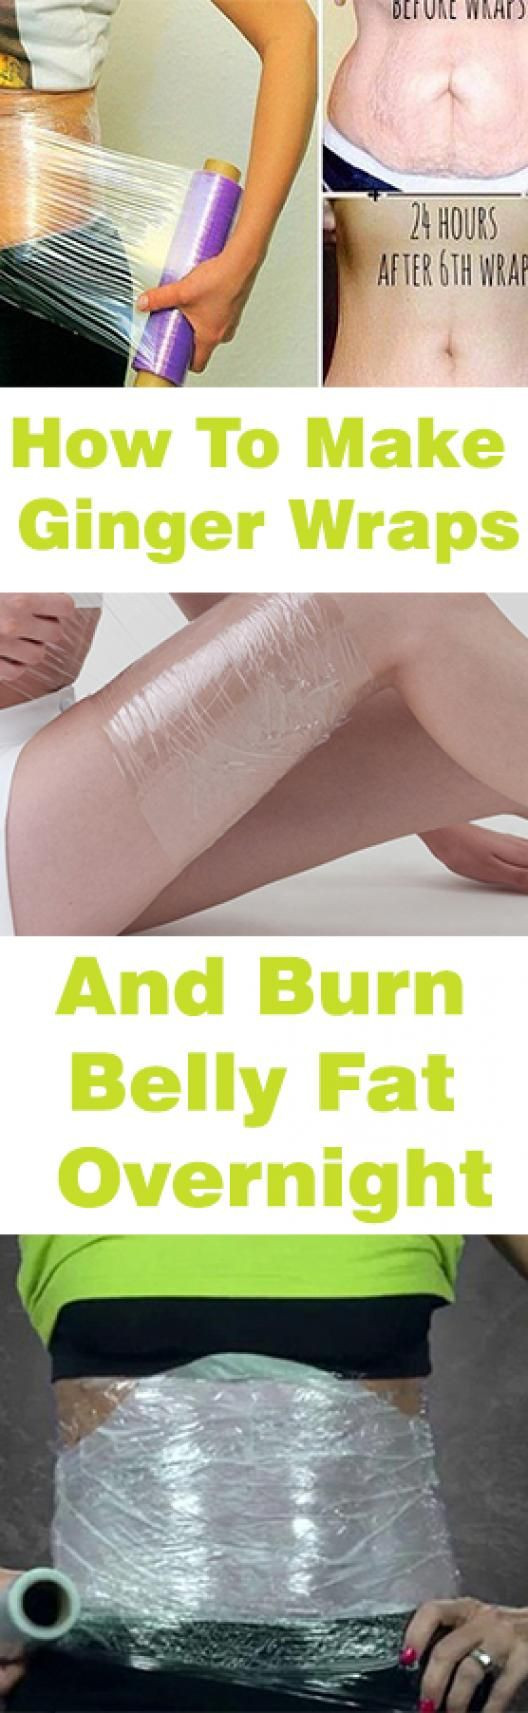 Burn Belly Fat Fast Overnight
 Pin on burn belly fat fast